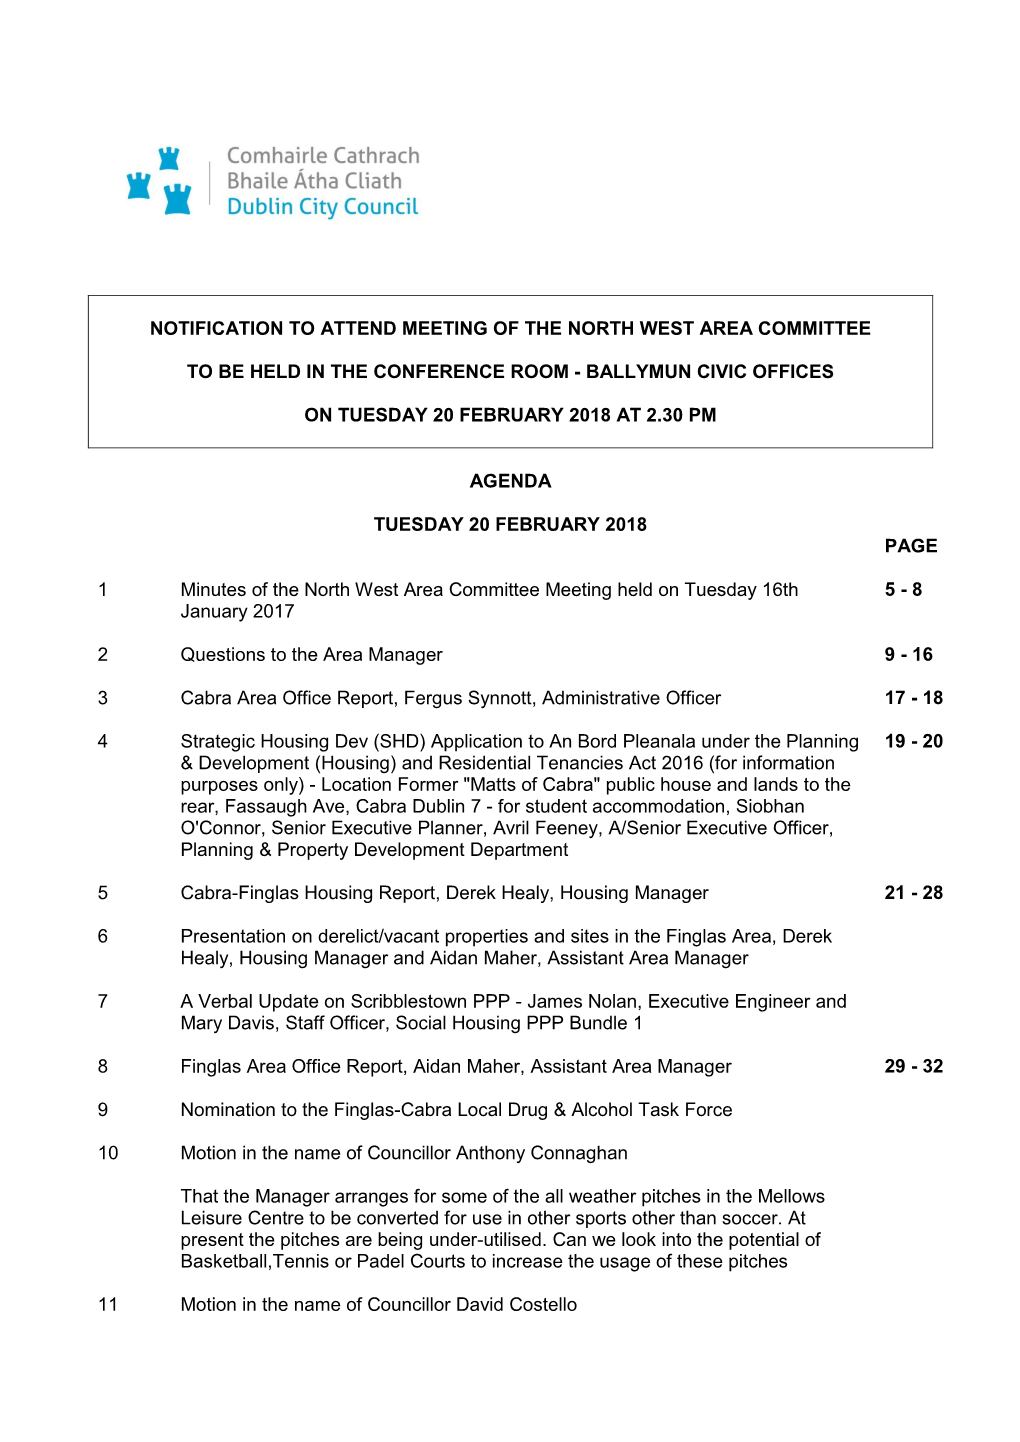 (Public Pack)Agenda Document for North West Area Committee, 20/02